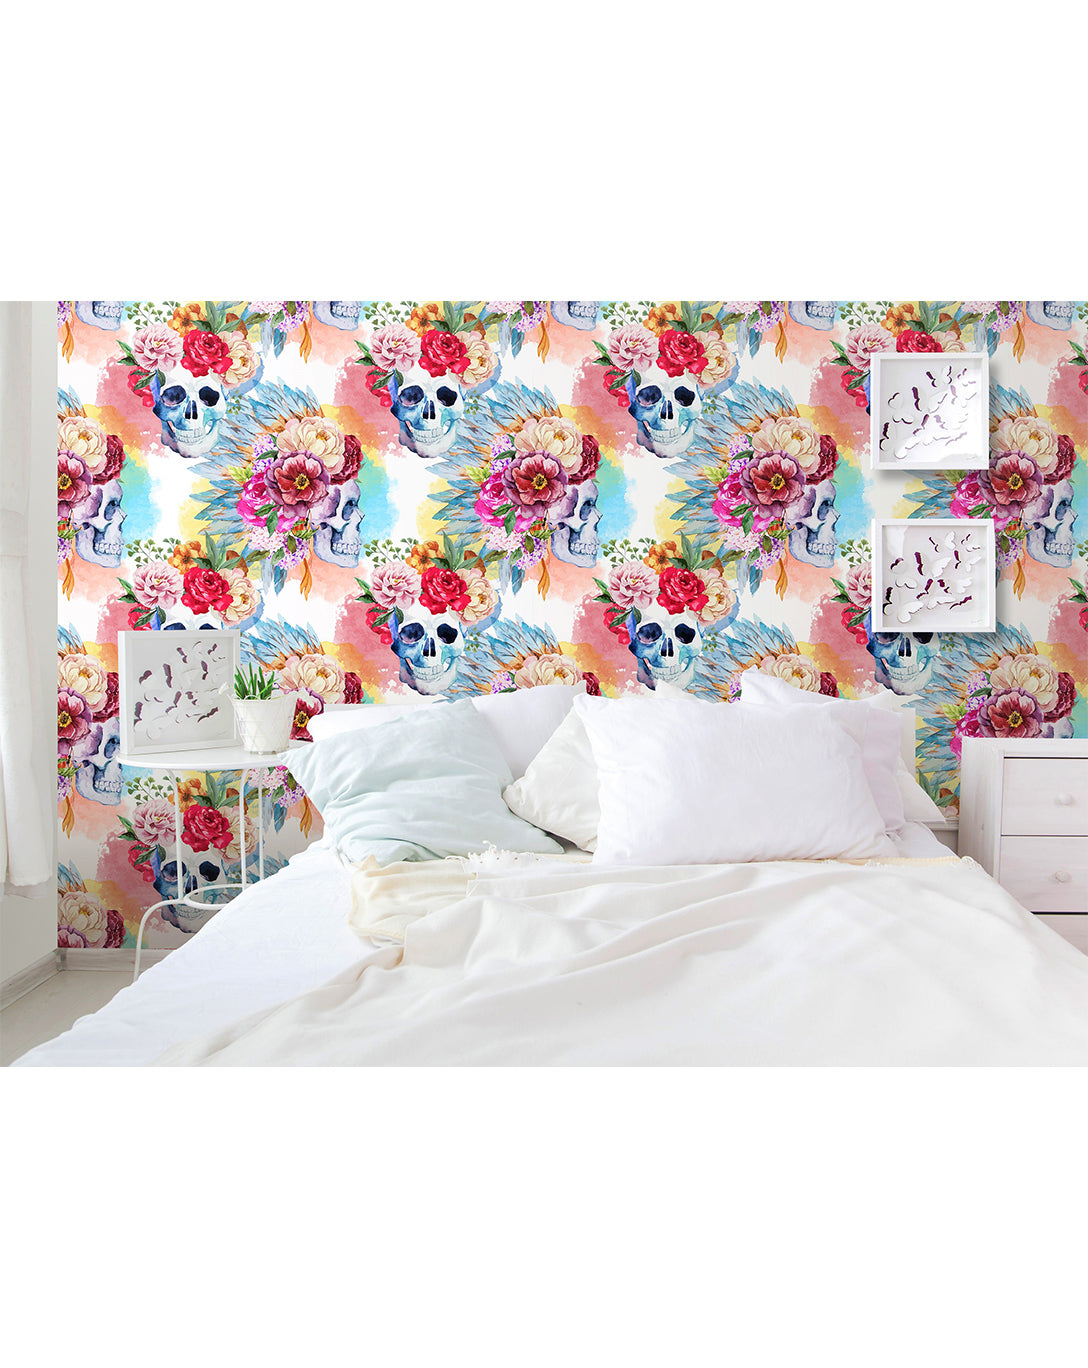 Self adhesive removable wallpaper with Colorful floral watercolor skulls, peel and stick wall vinyl CC100